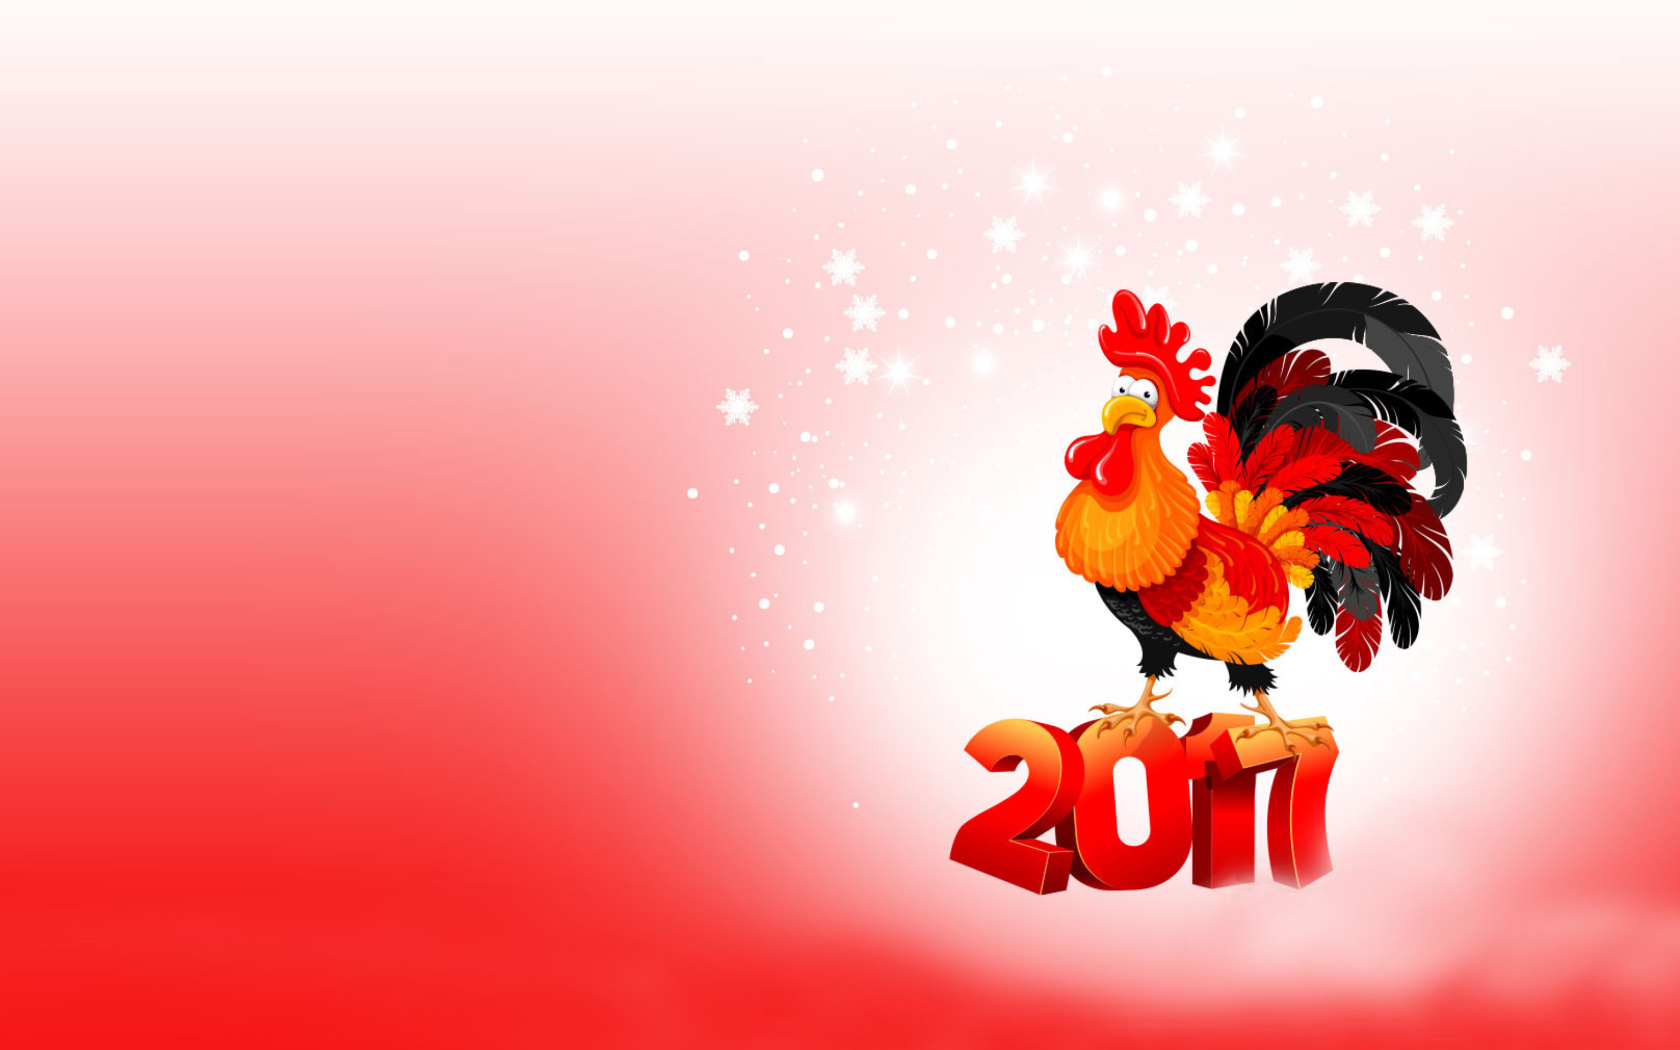 Das 2017 New Year of Cock Wallpaper 1680x1050